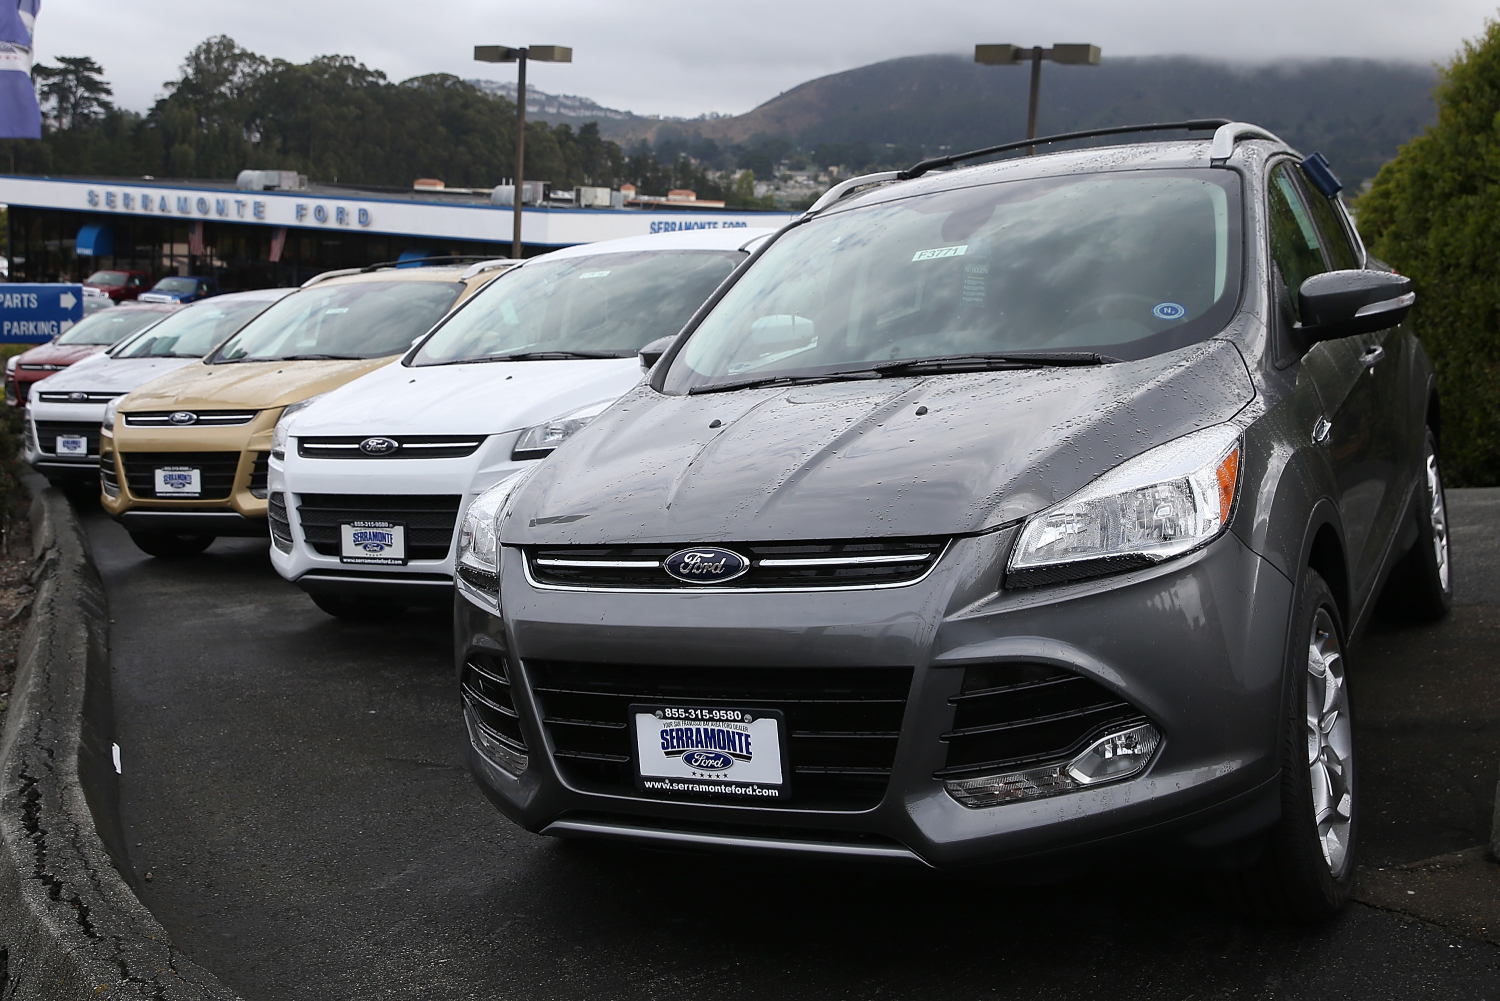 The best websites for buying a used SUV